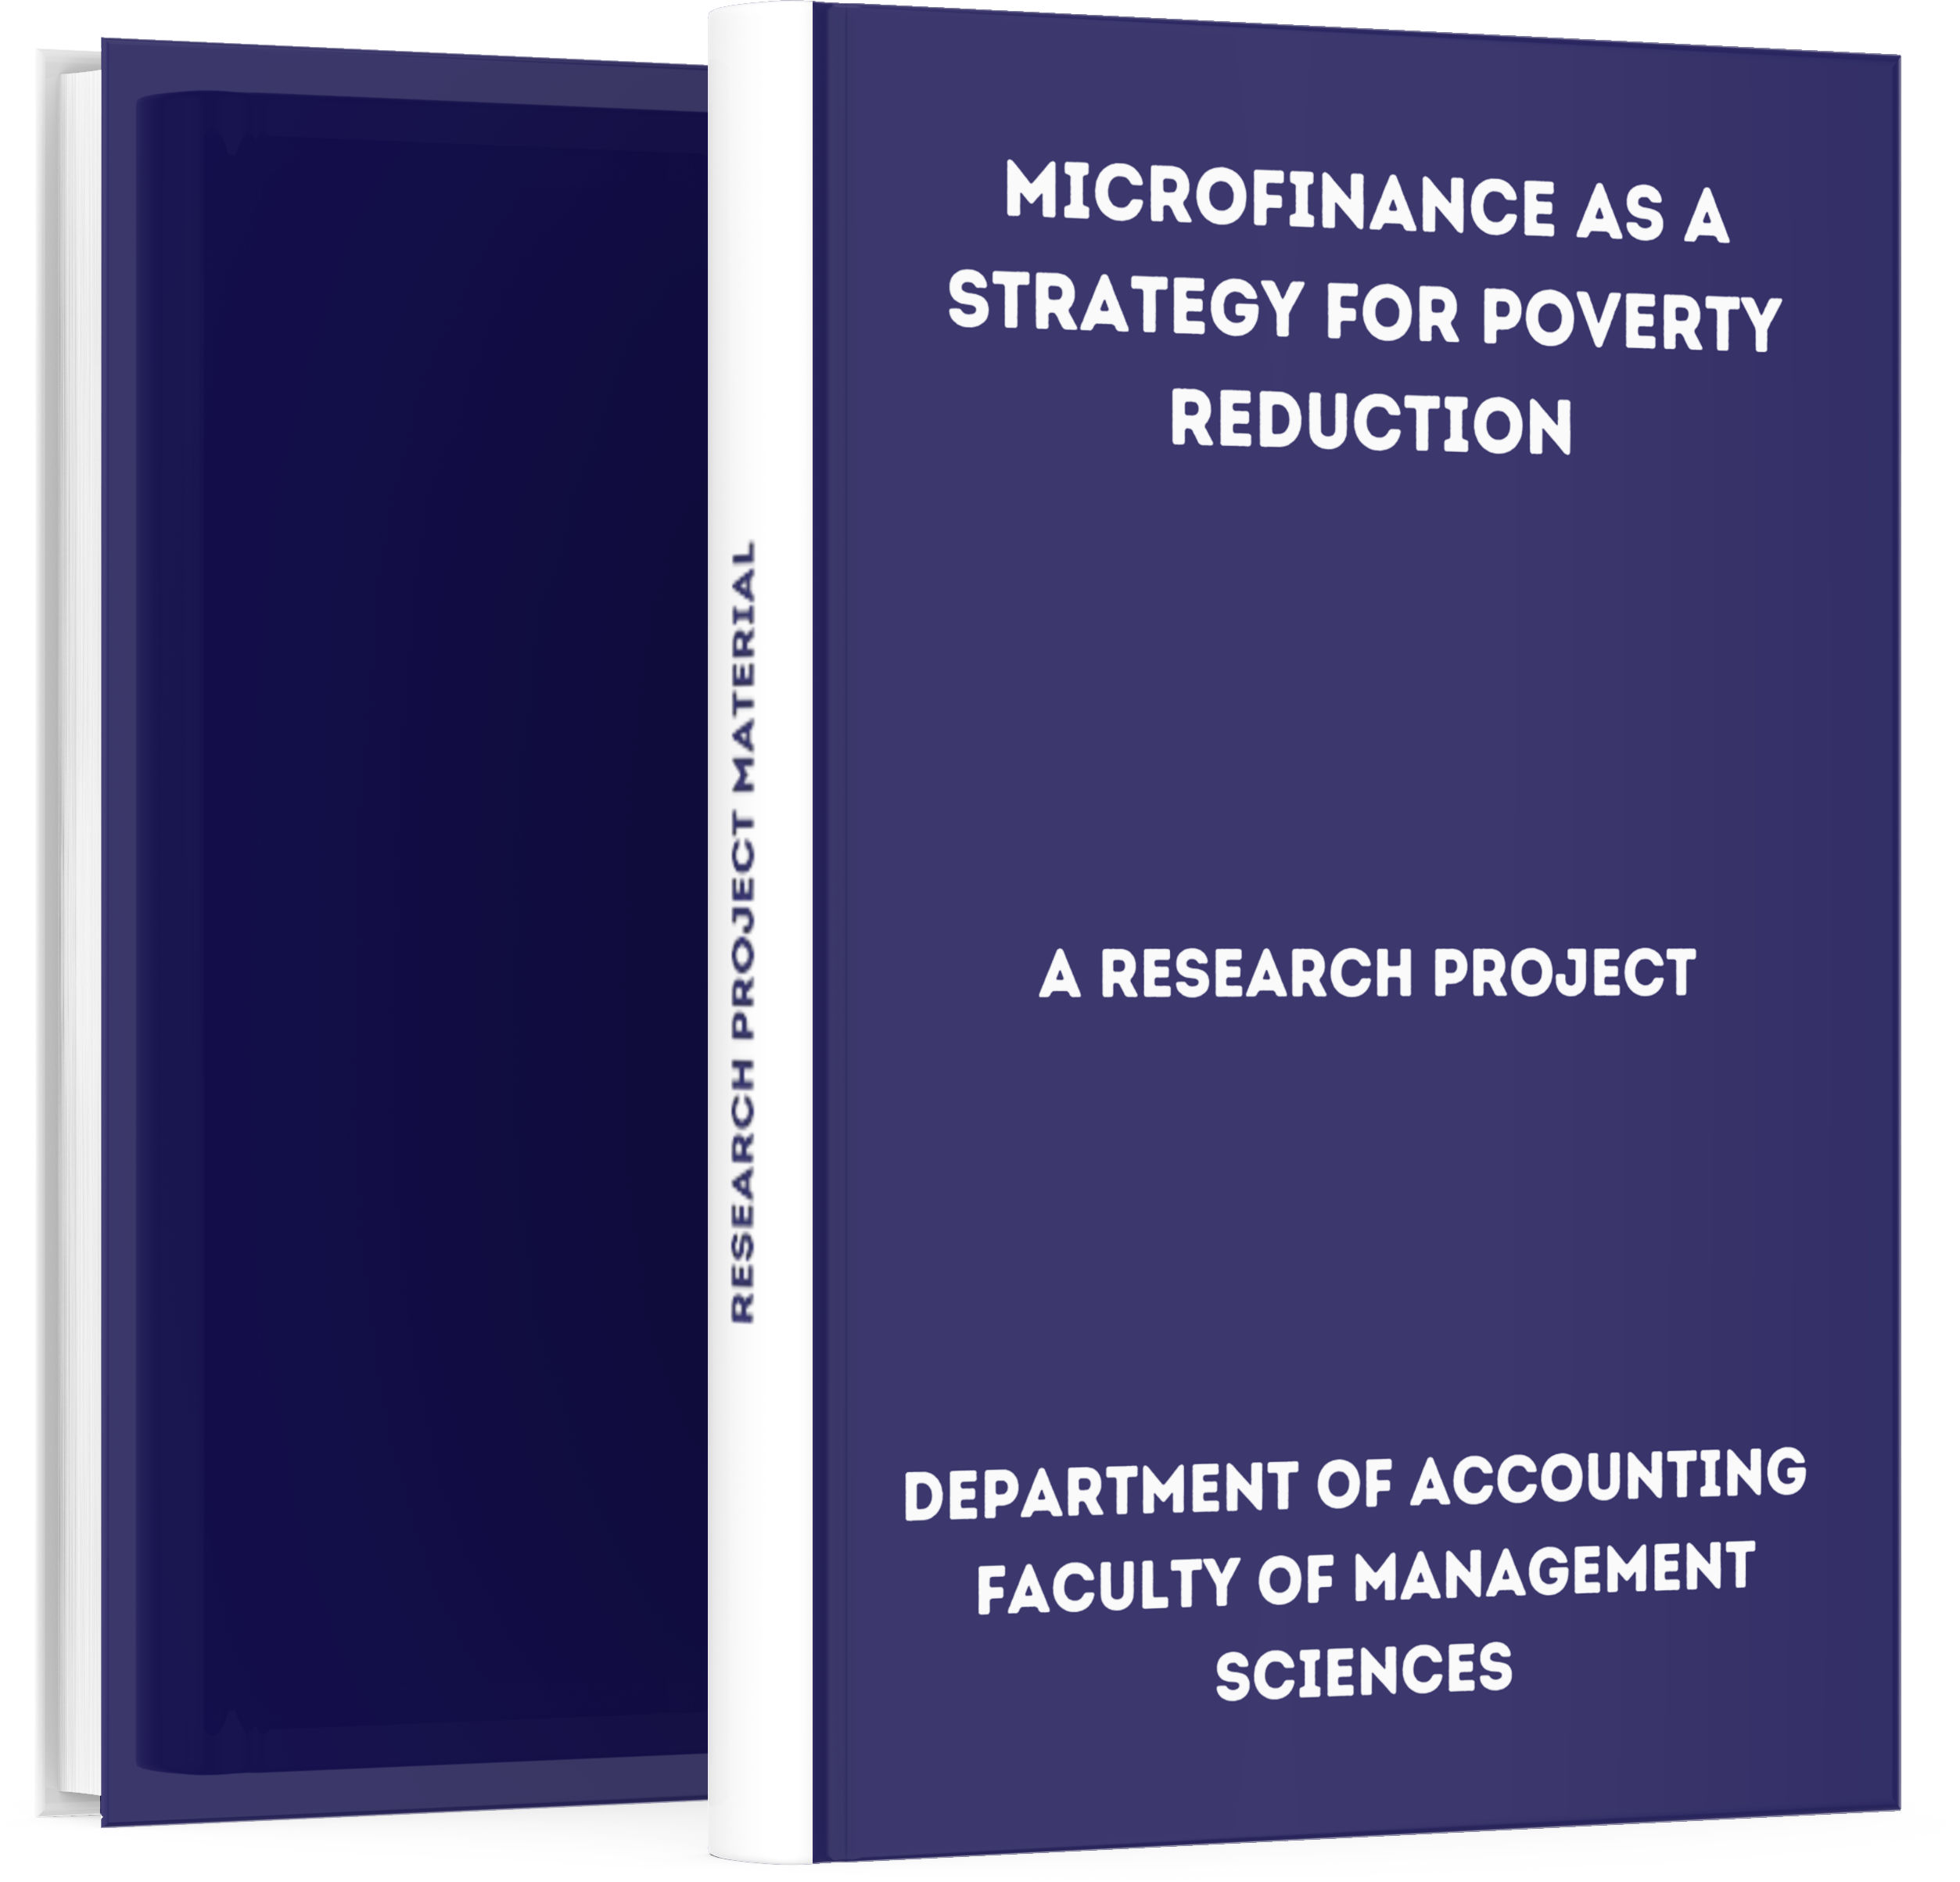 literature review on microfinance and poverty reduction